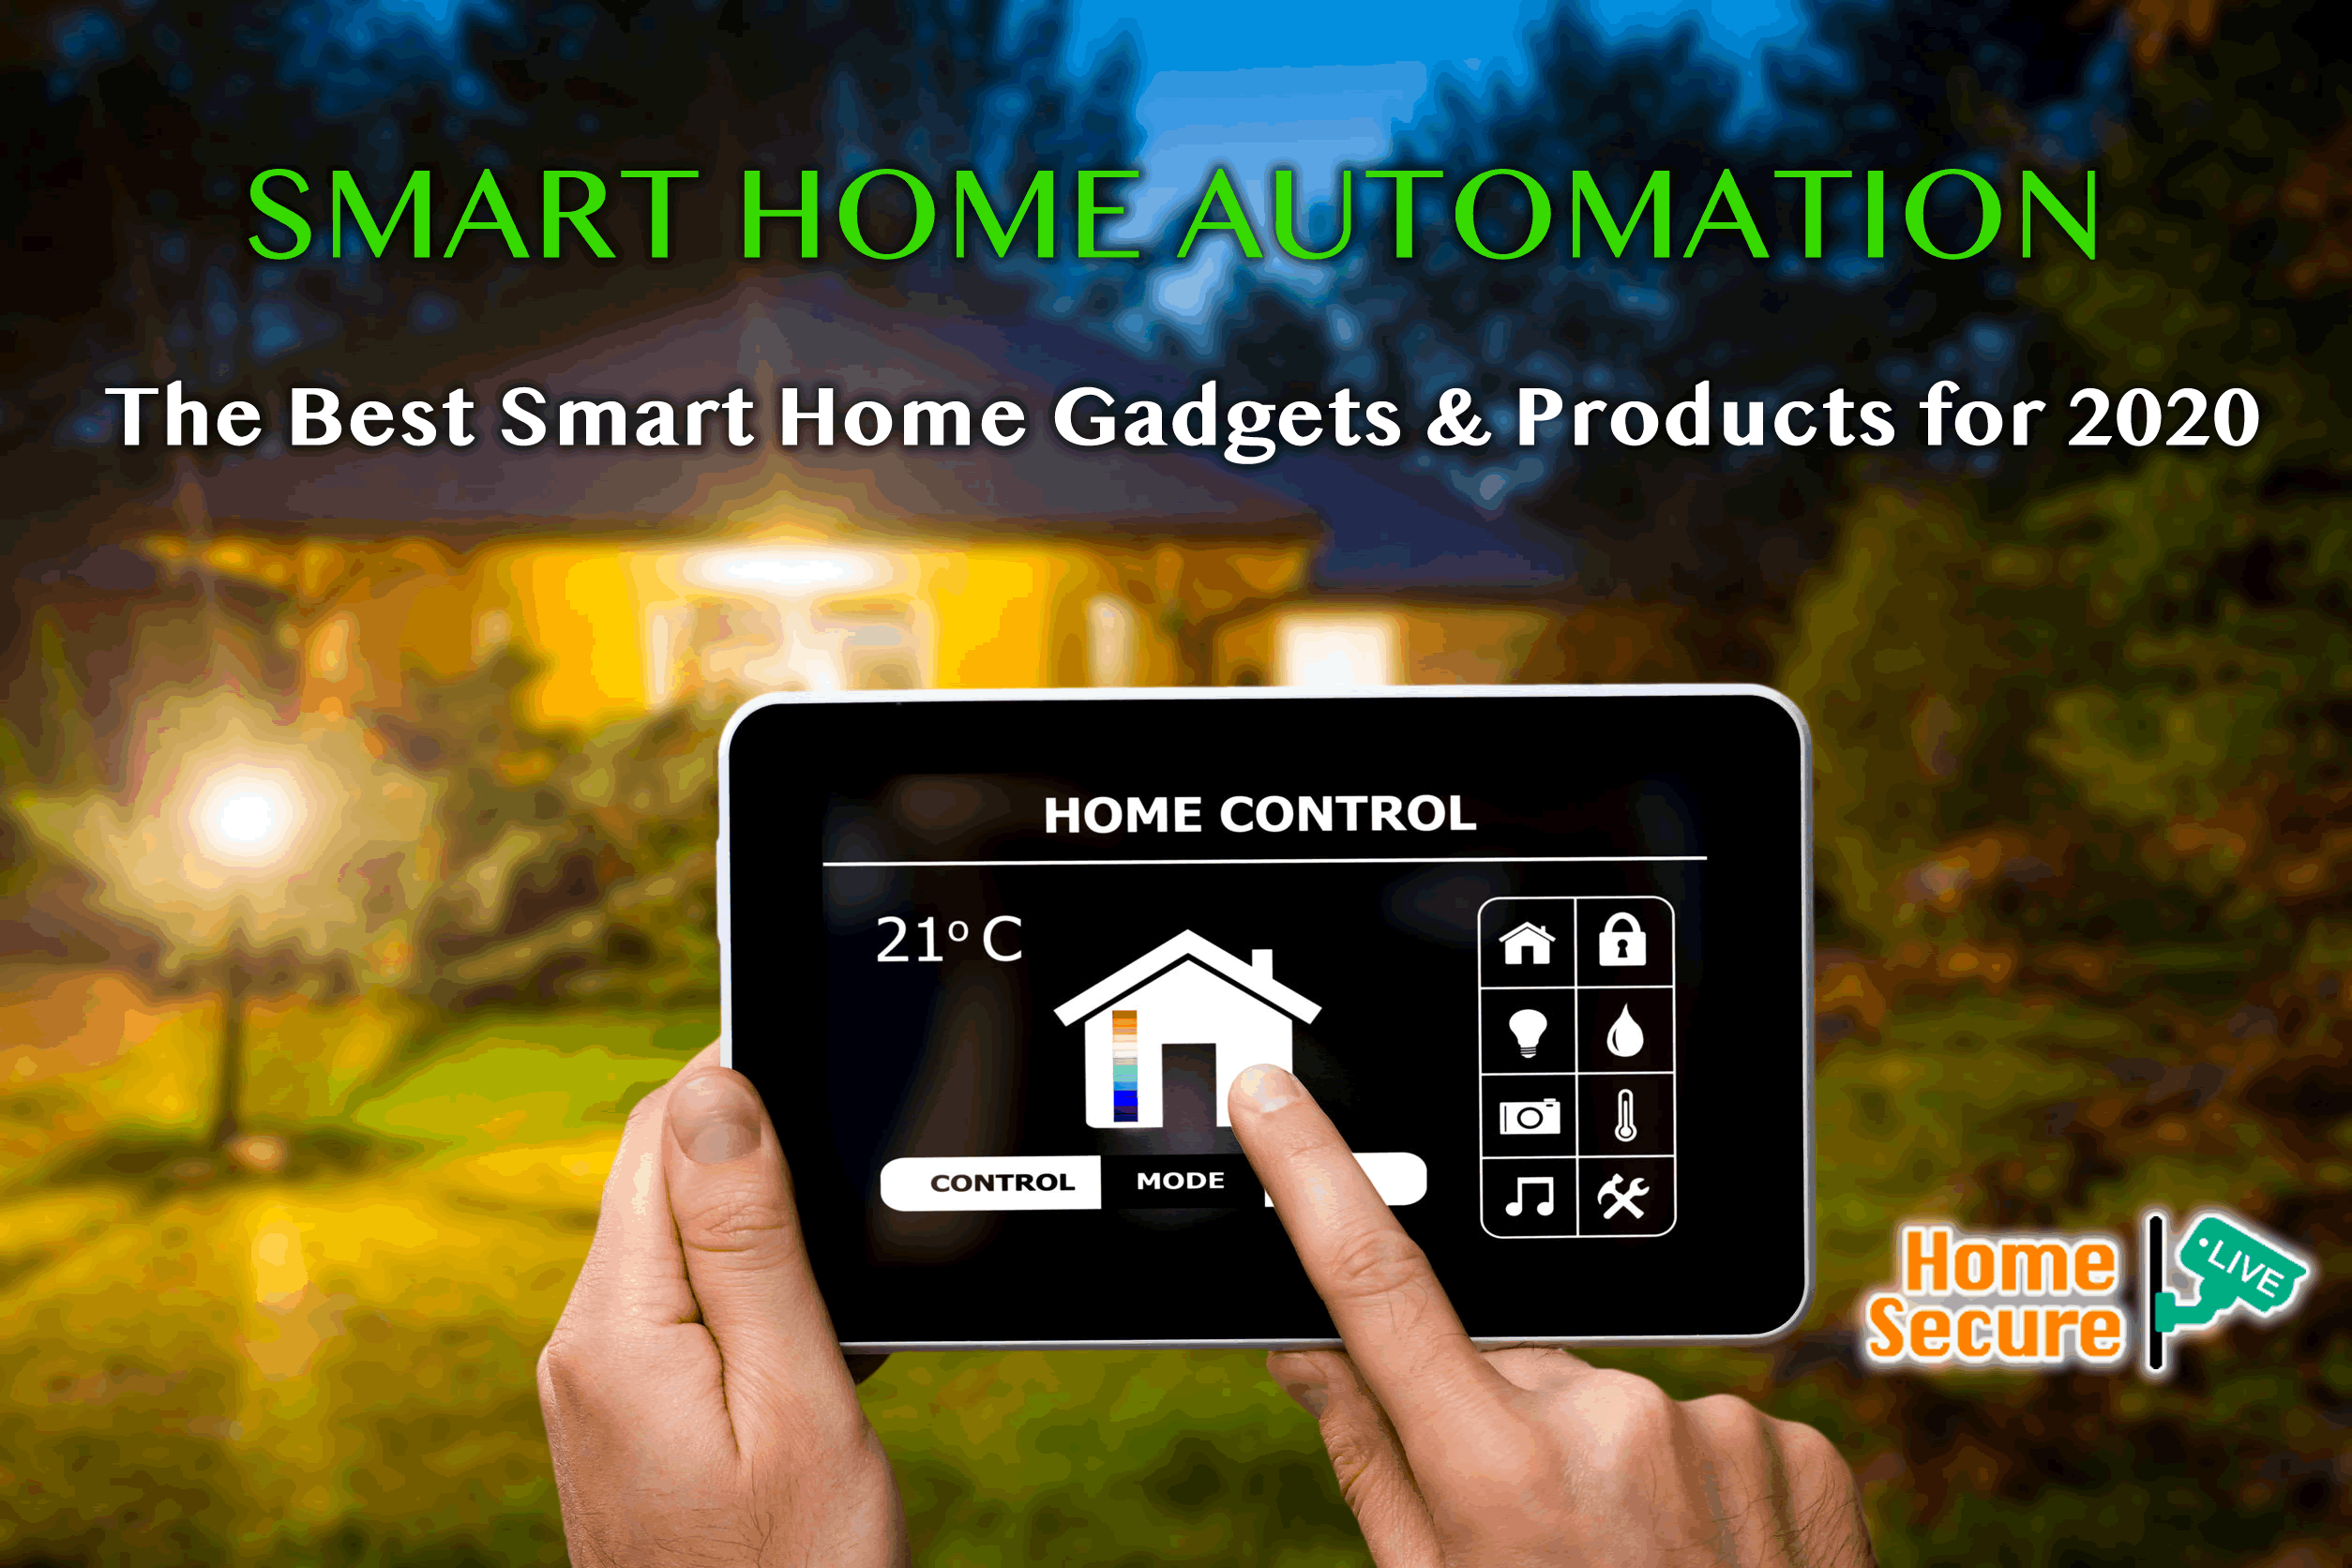 The Best Smart Home Gadgets & Products for 2020